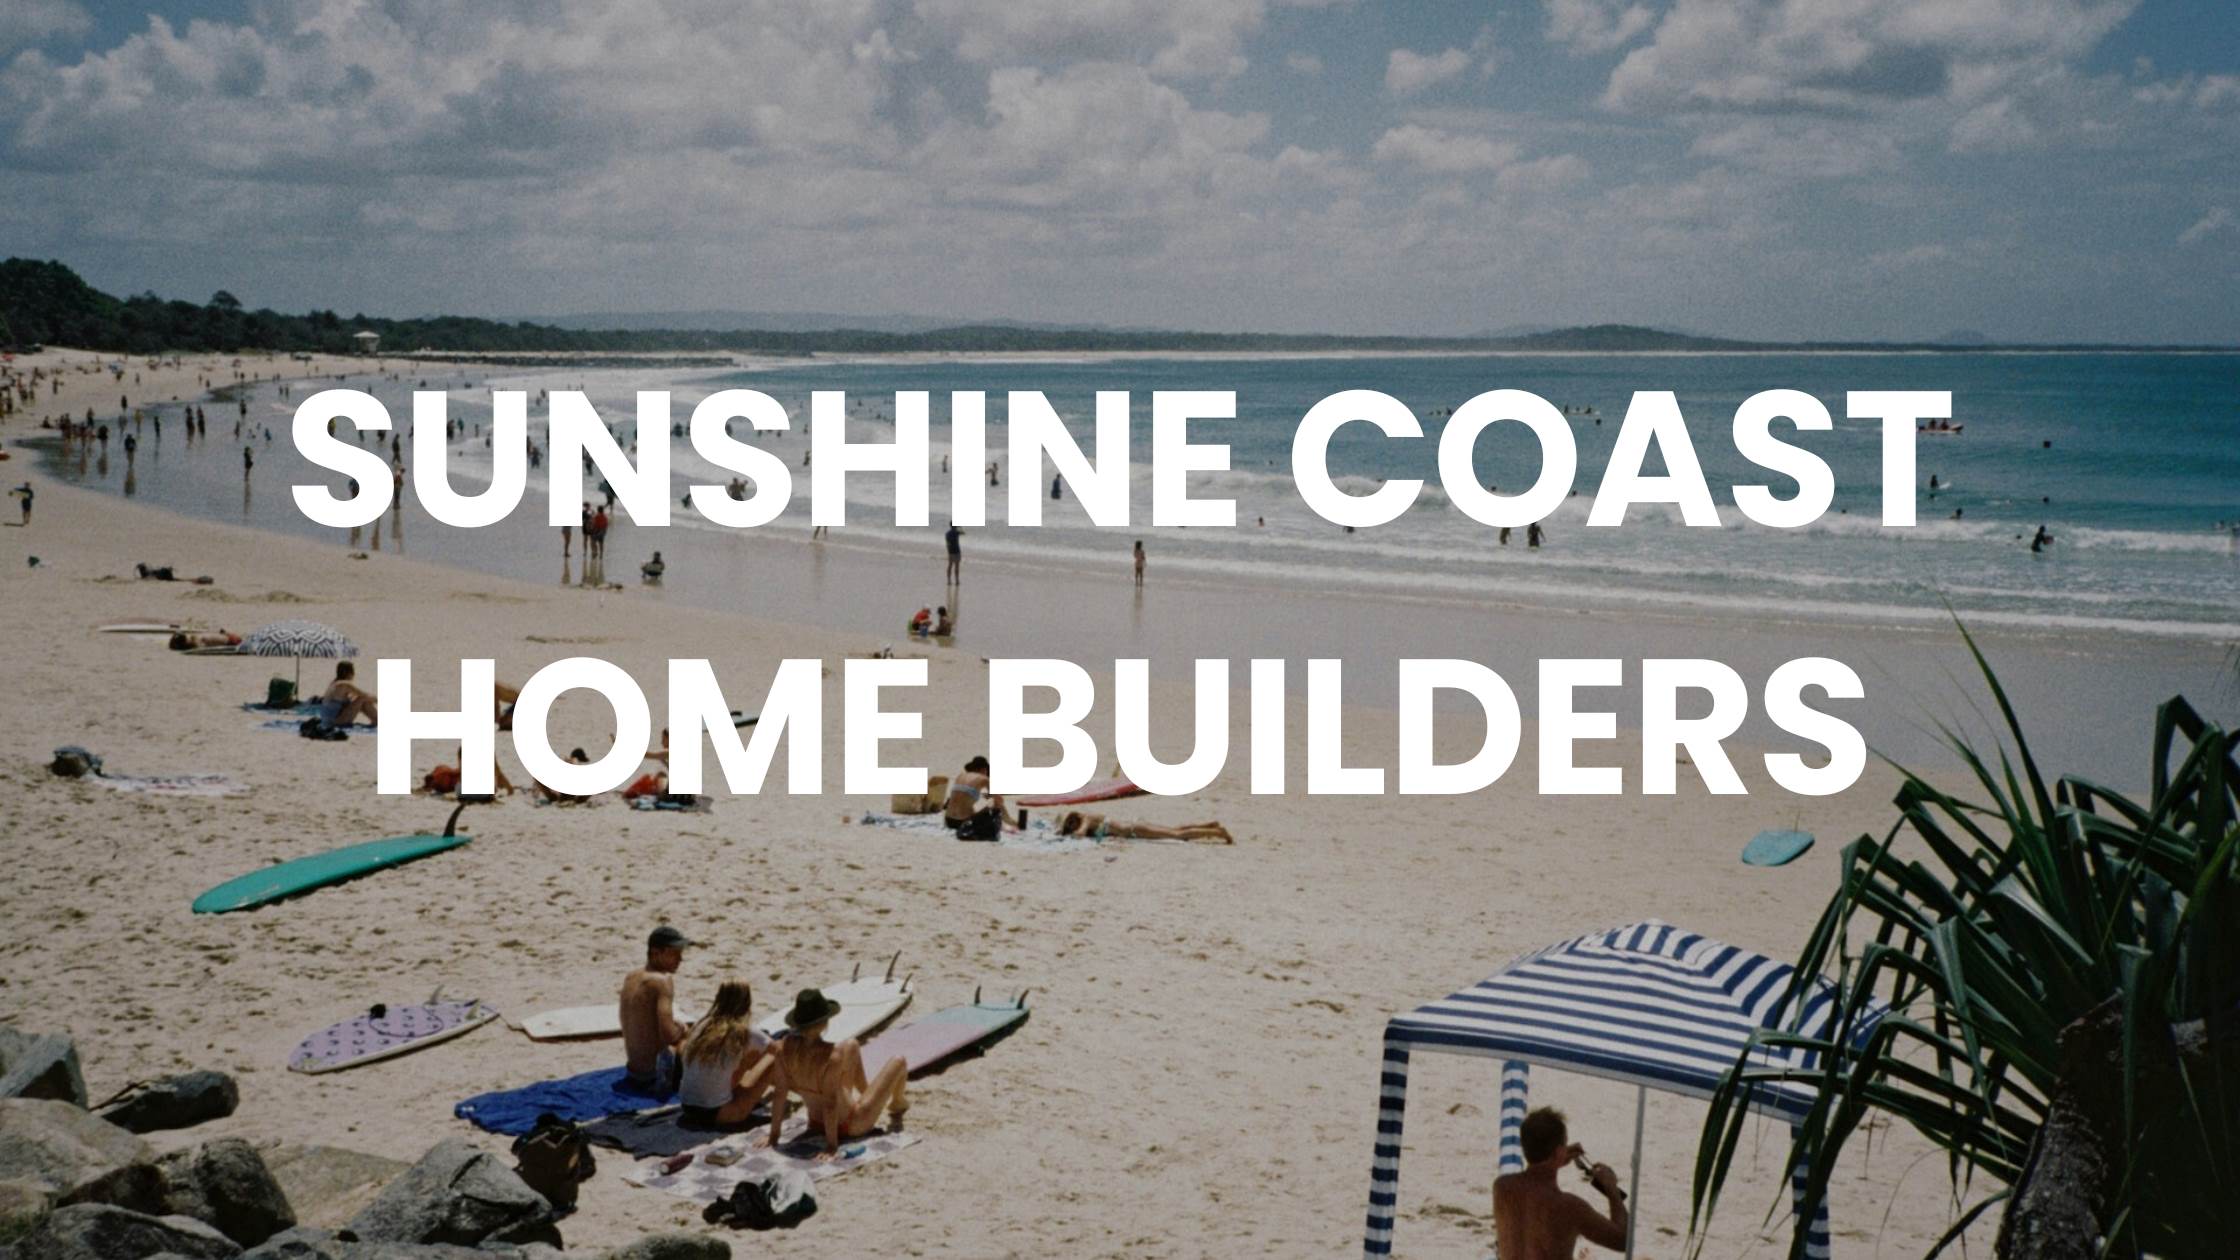 Noosa Heads beach scene with people walking, sitting, and surfing, overlaid with 'SUNSHINE COAST HOME BUILDERS' text